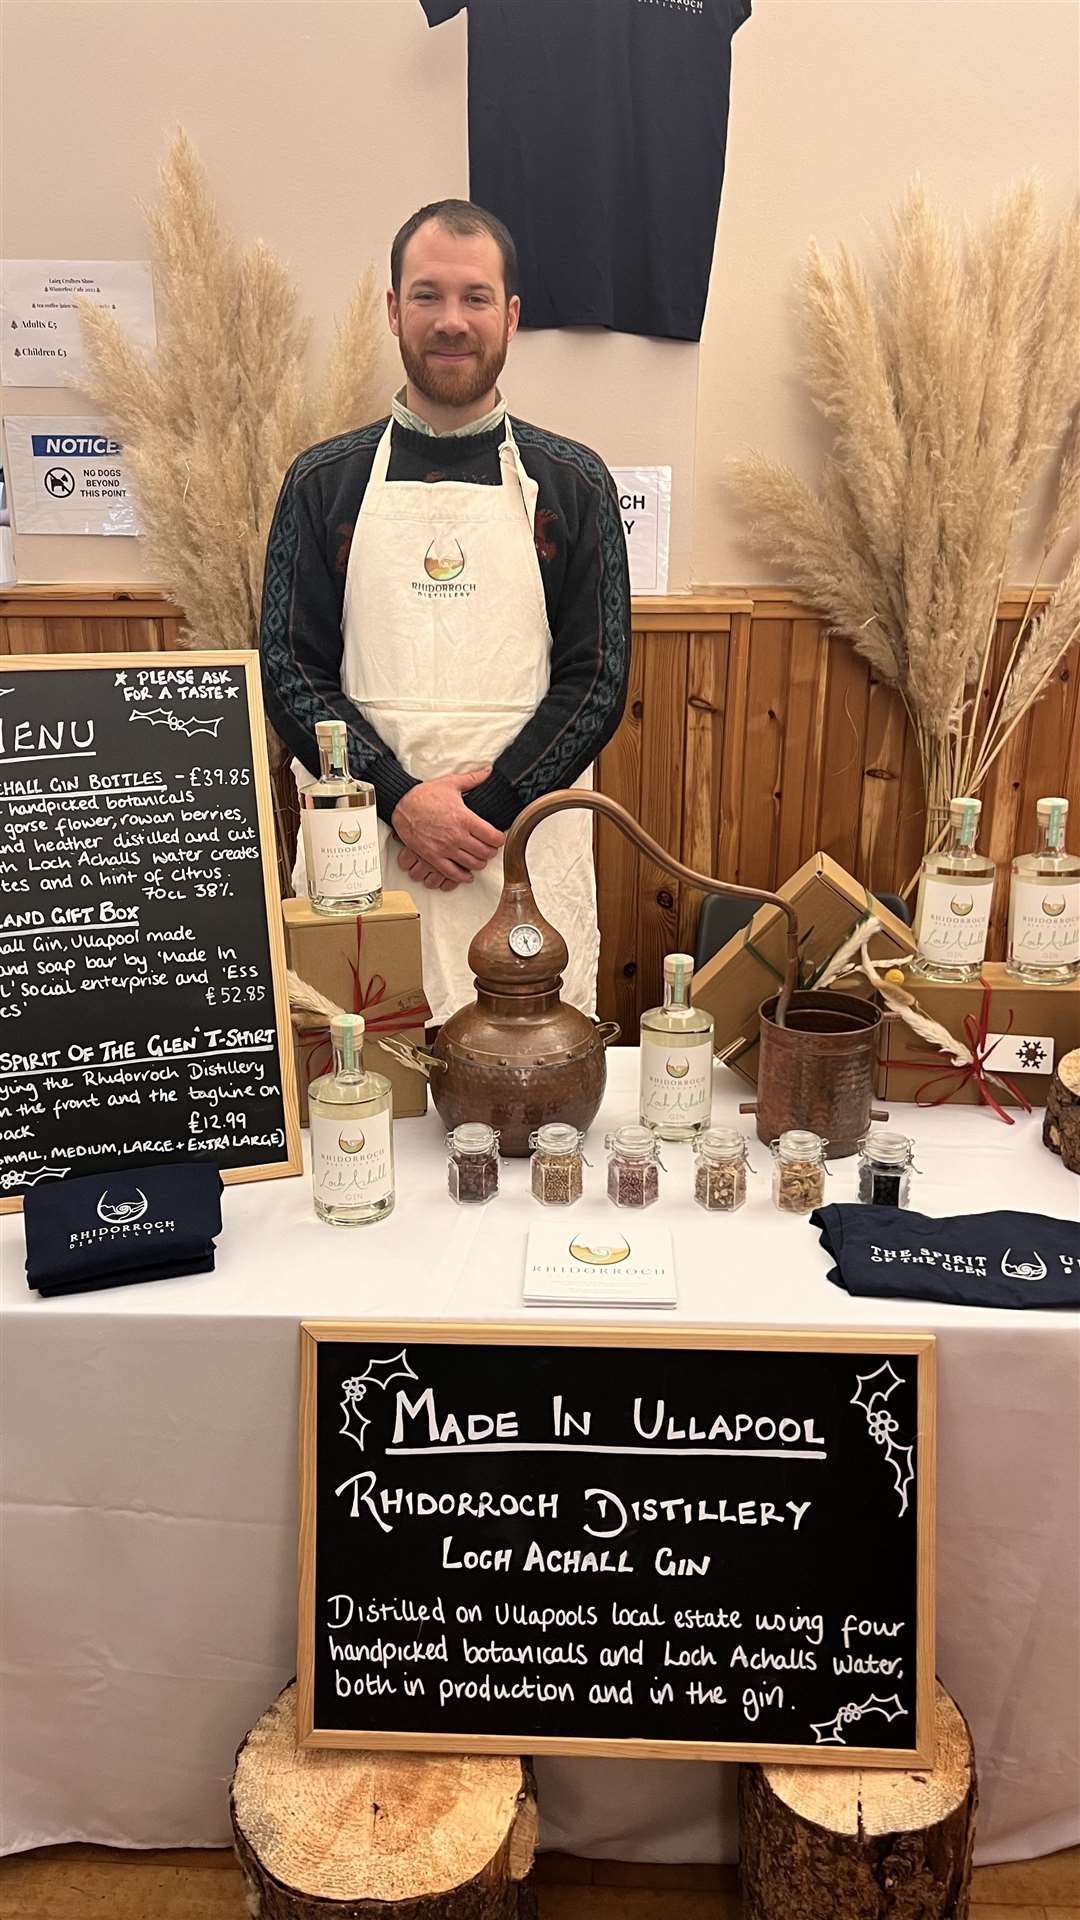 Lawrie Quibell at the Rhidorroch Distillery stand.